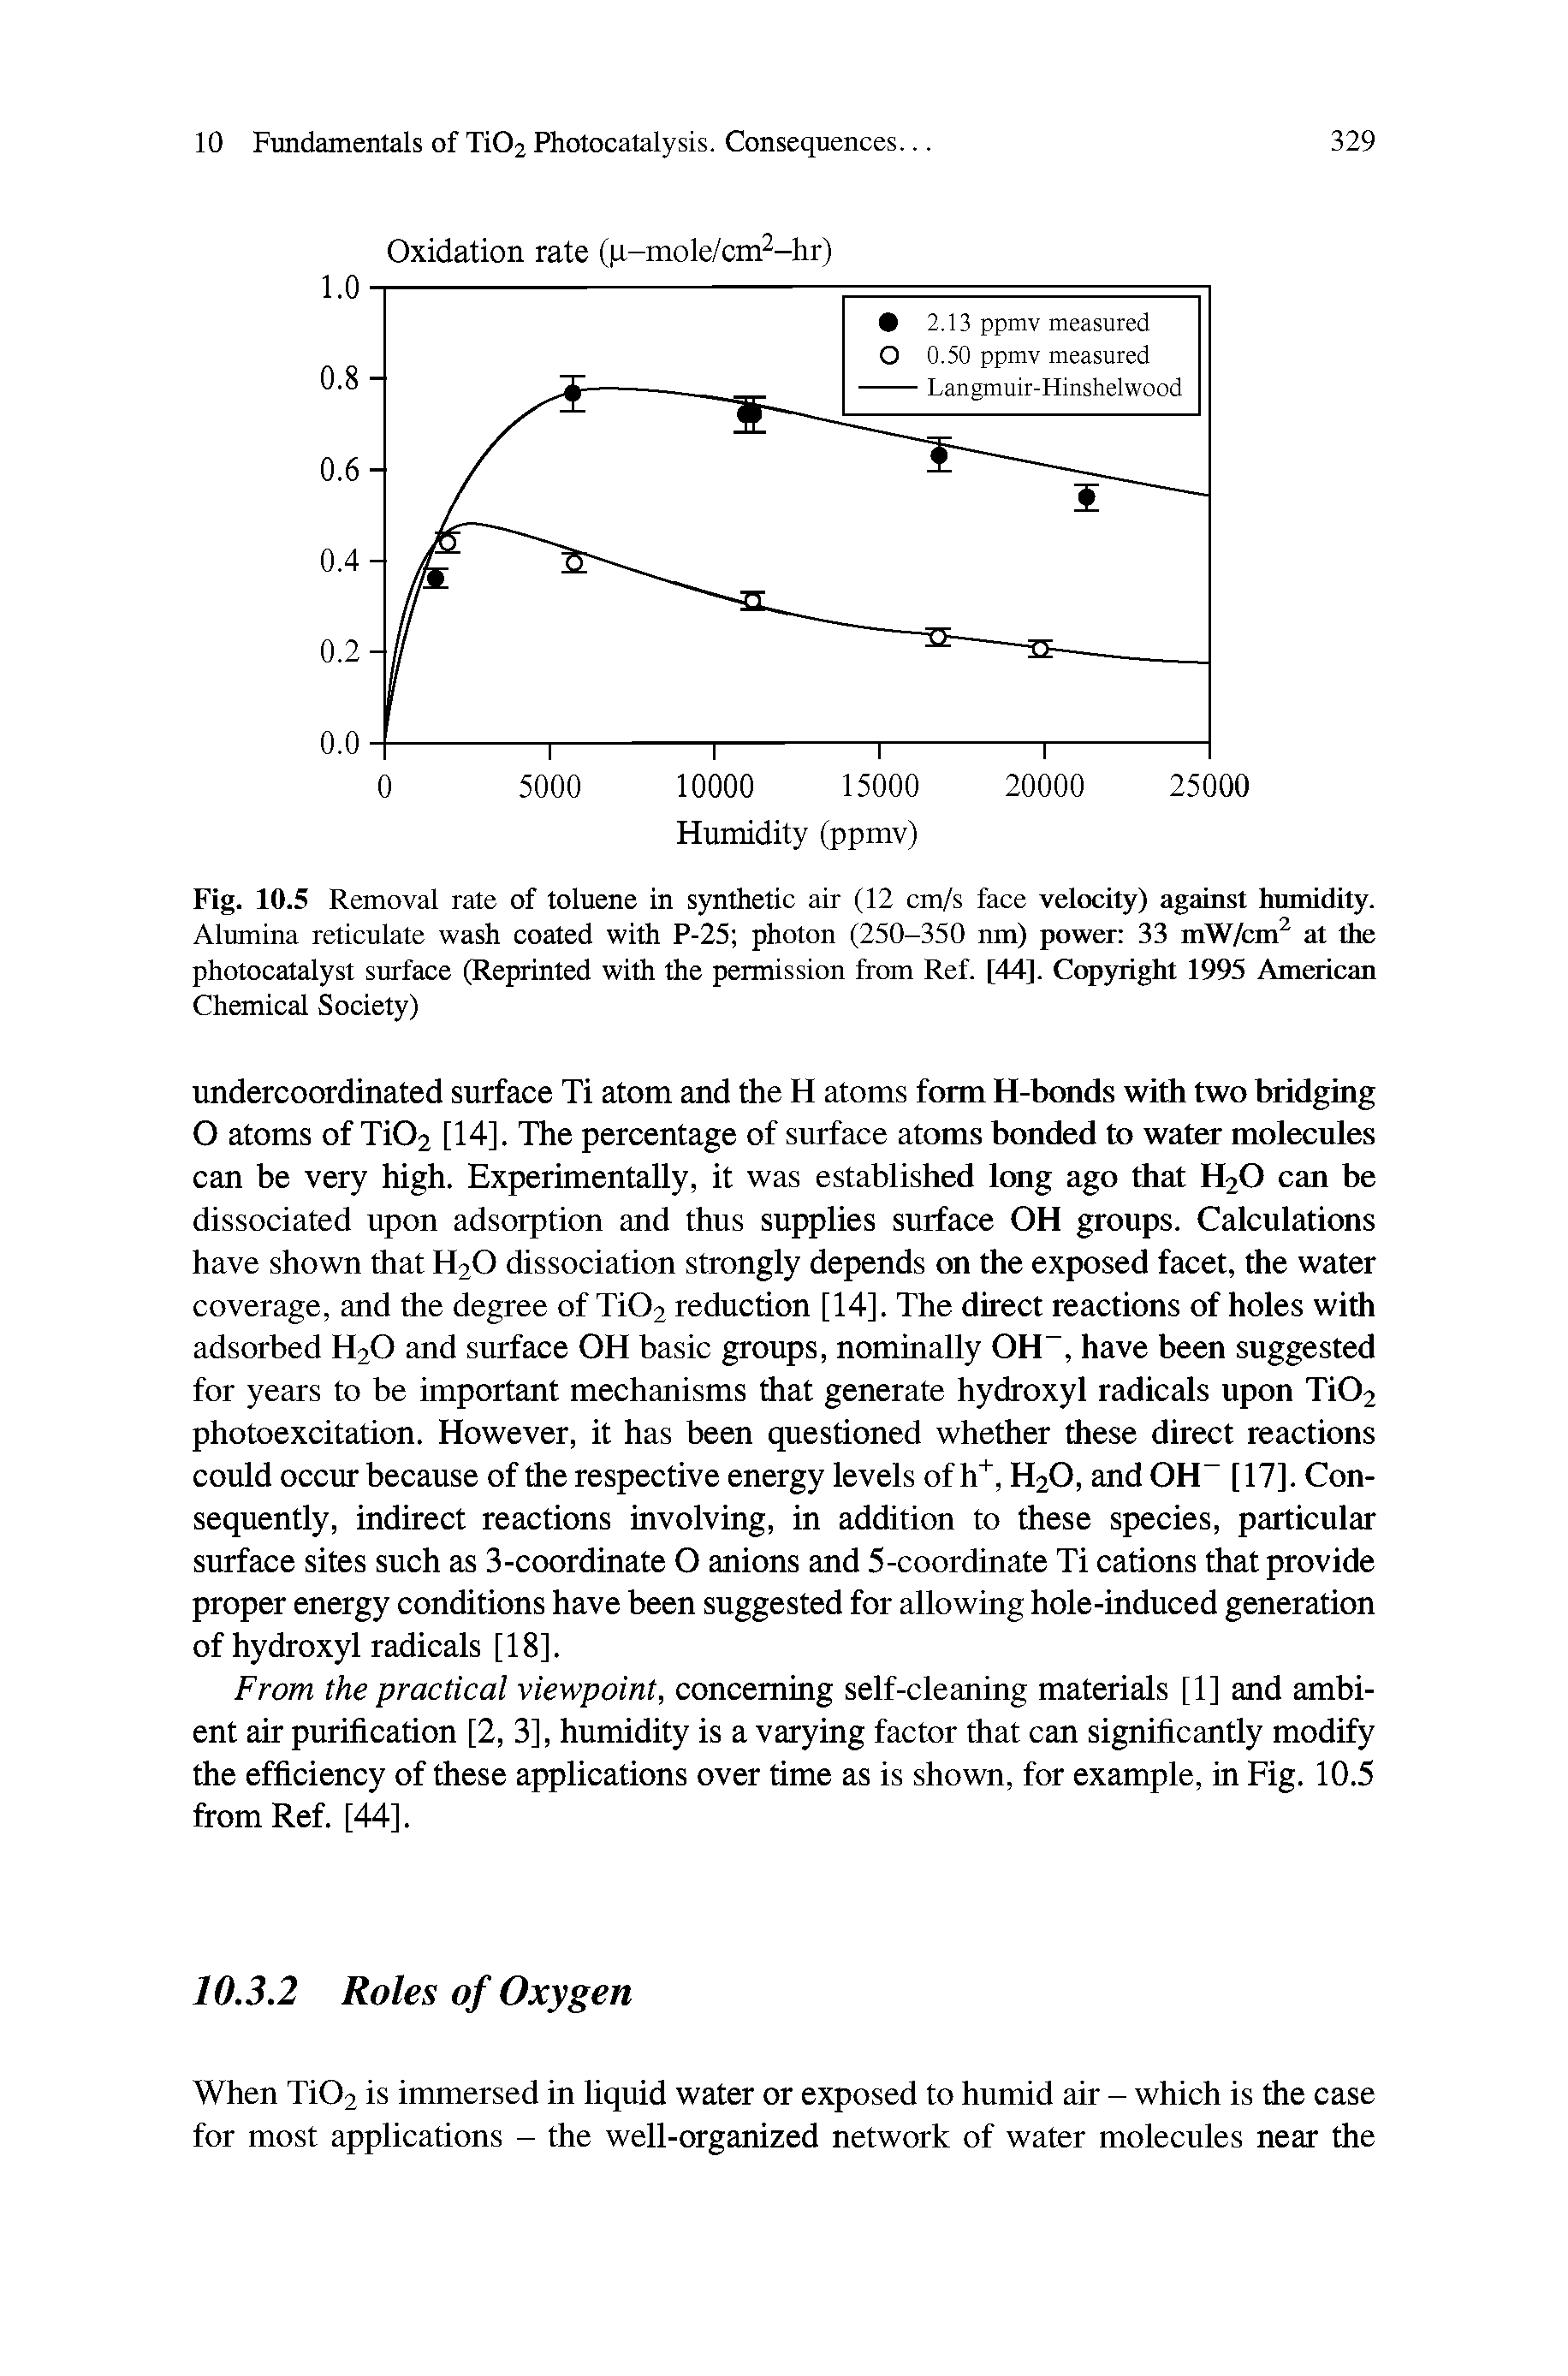 Fig. 10.5 Removal rate of toluene in synthetic air (12 cm/s face velocity) against humidity. Alumina reticulate wash coated with P-25 photon (250-350 nm) power 33 mW/cm at the photocatalyst surface (Reprinted with the permission from Ref. [44]. Copyright 1995 Amcaiean...